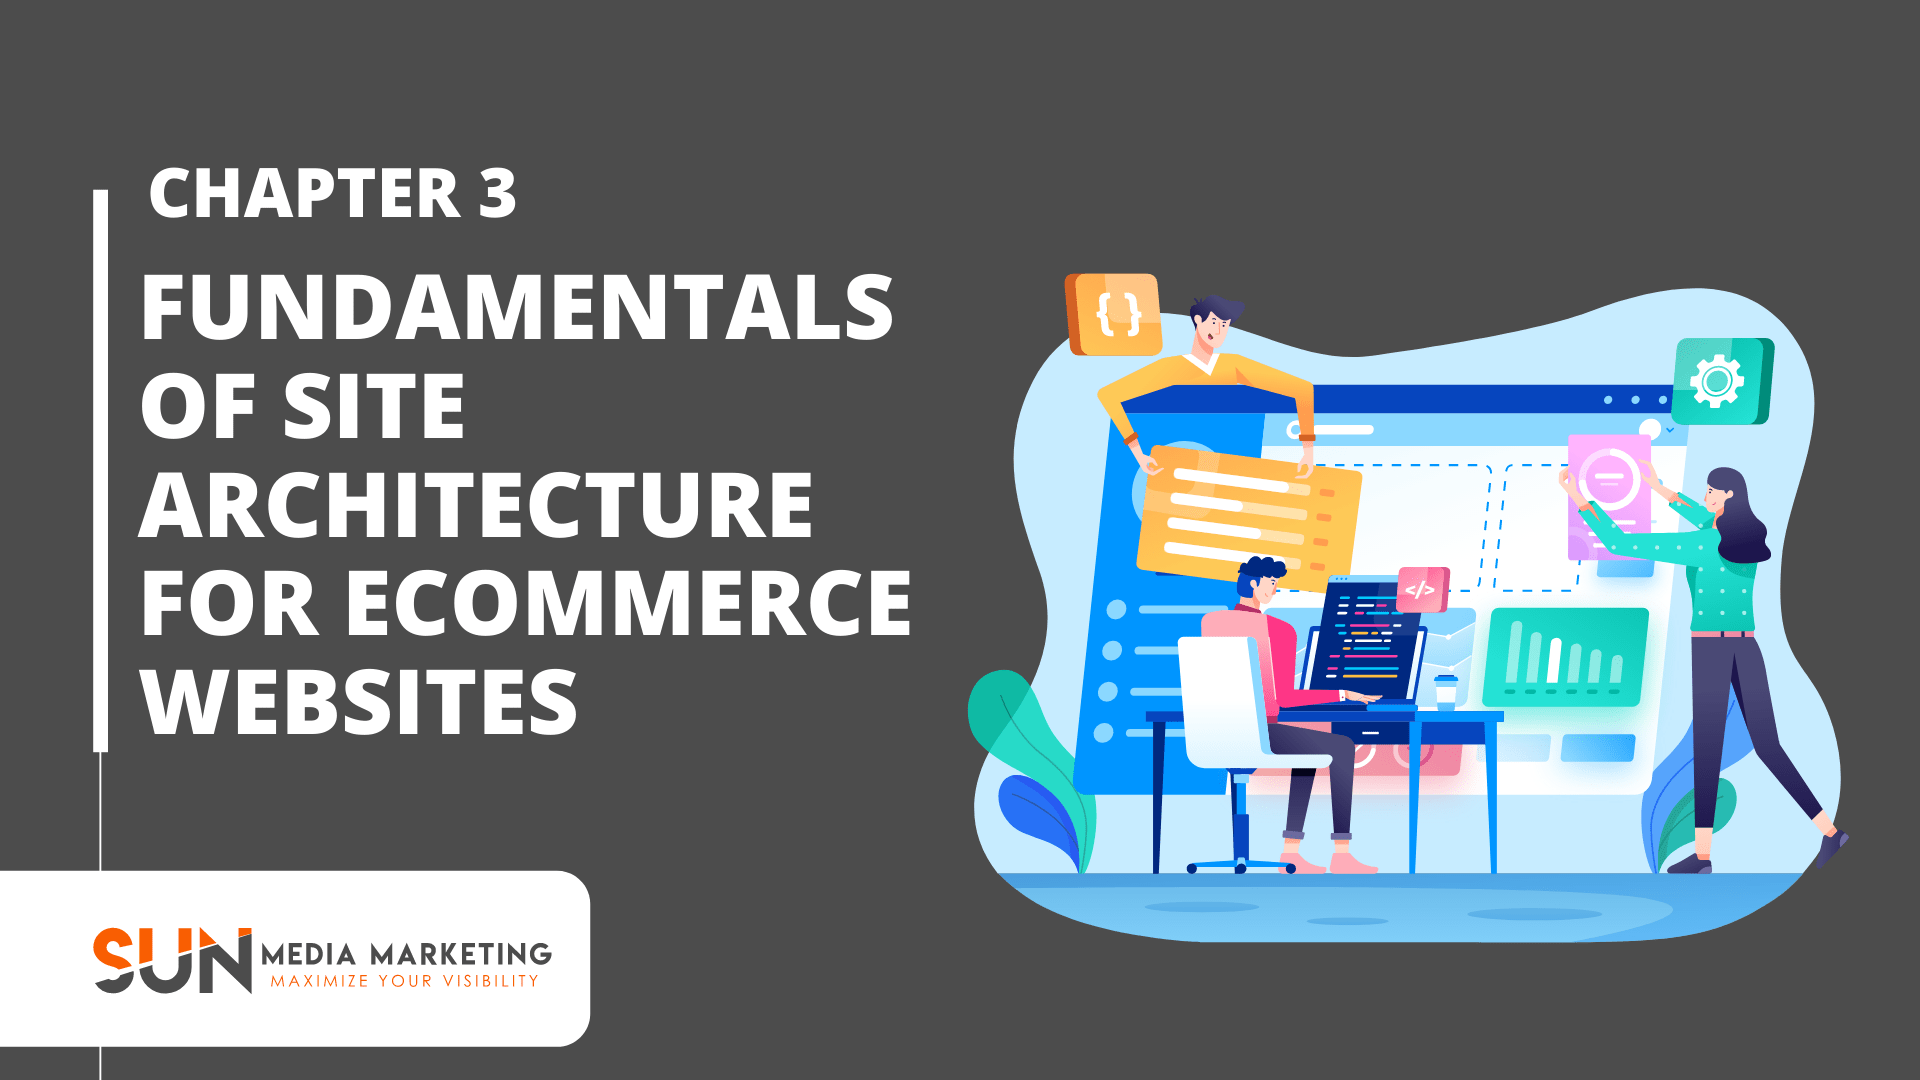 Fundamentals of Site Architecture for eCommerce Websites